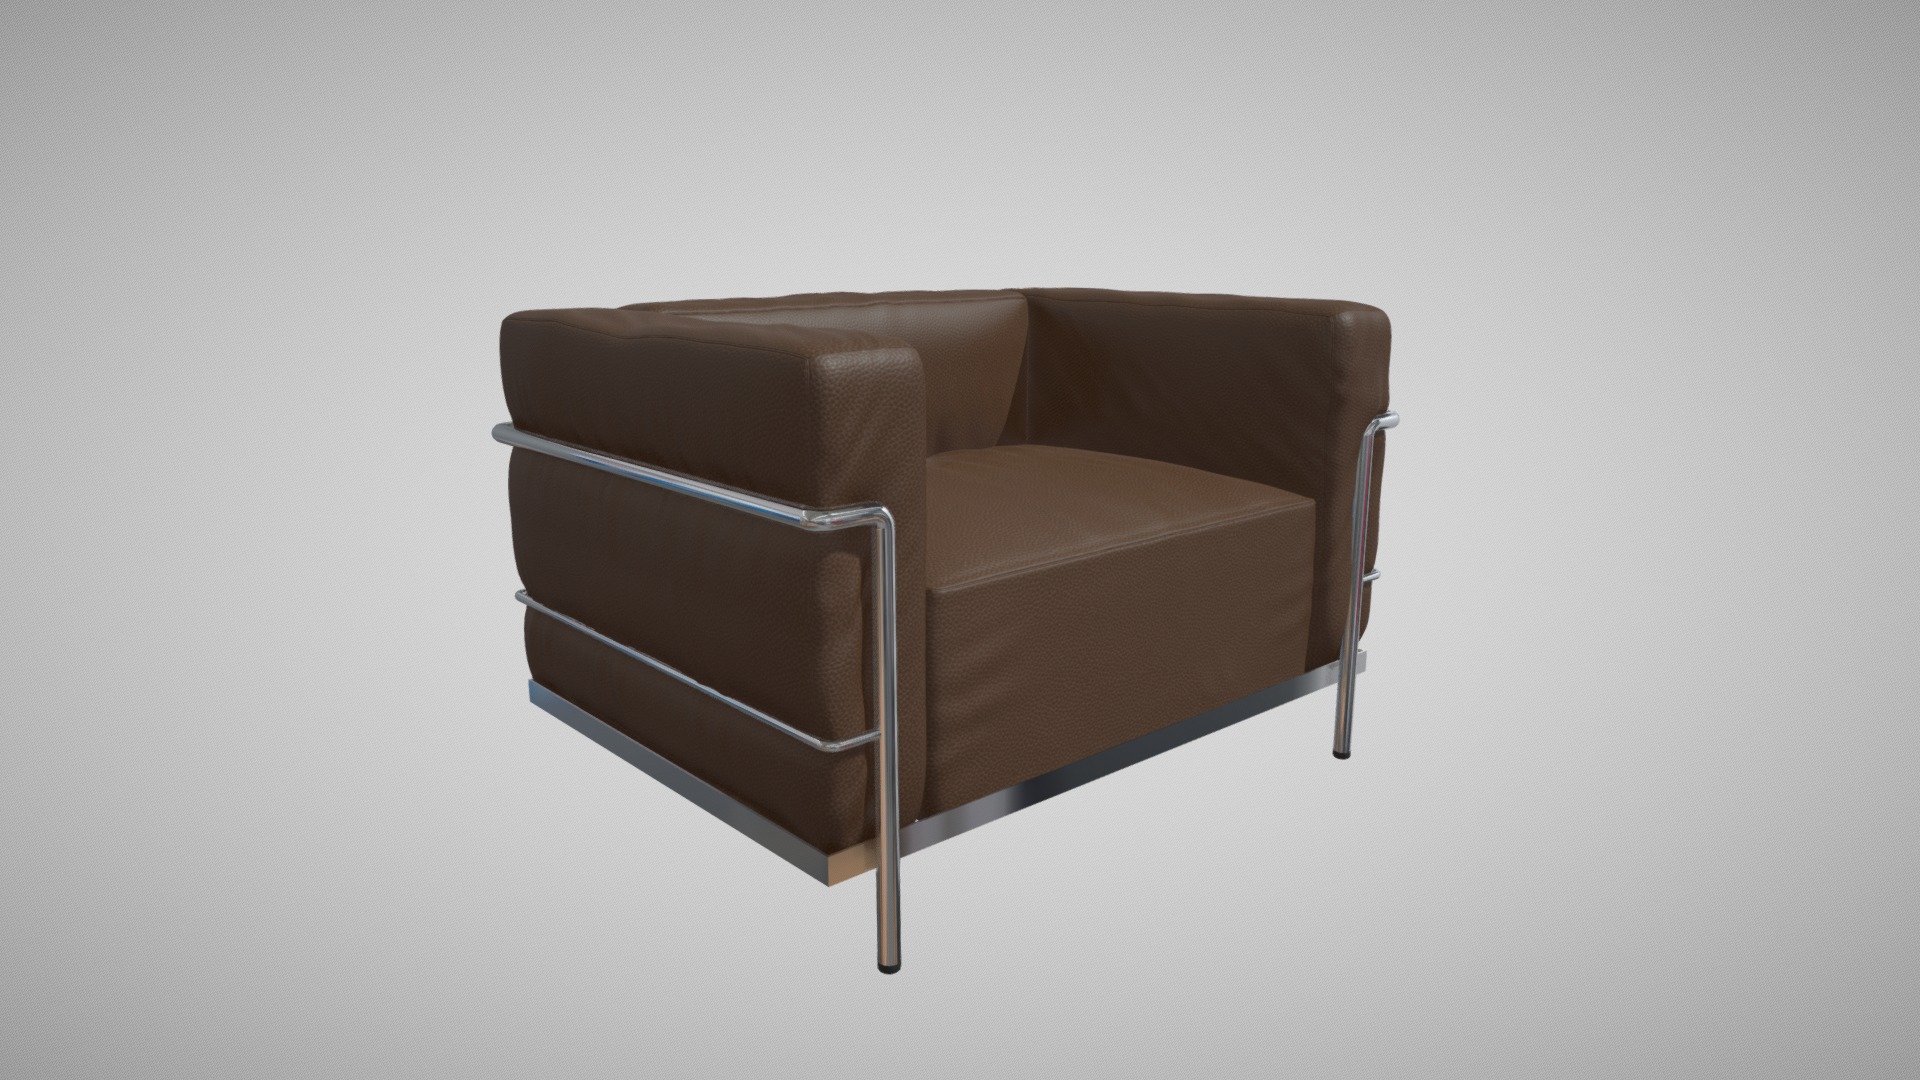 3D model Lc3 Poltrona - This is a 3D model of the Lc3 Poltrona. The 3D model is about a brown leather chair.